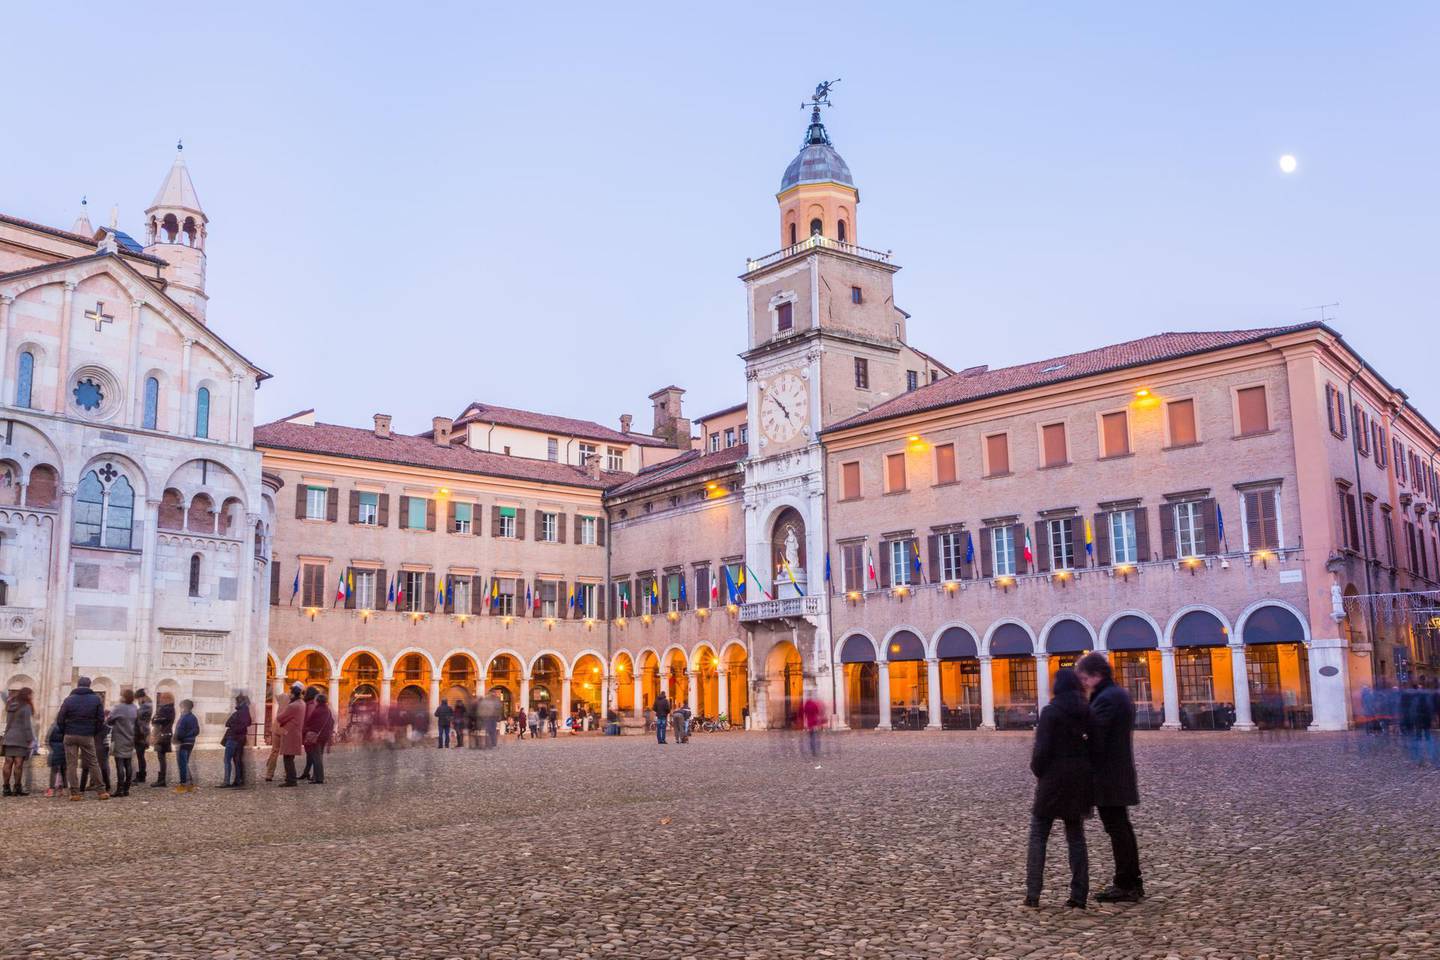 Modena, Piazza Grande, Emilia Romagna. Italy. Sunset with the town Hall illuminated and cathedral and La Bonissima statue. Getty Images